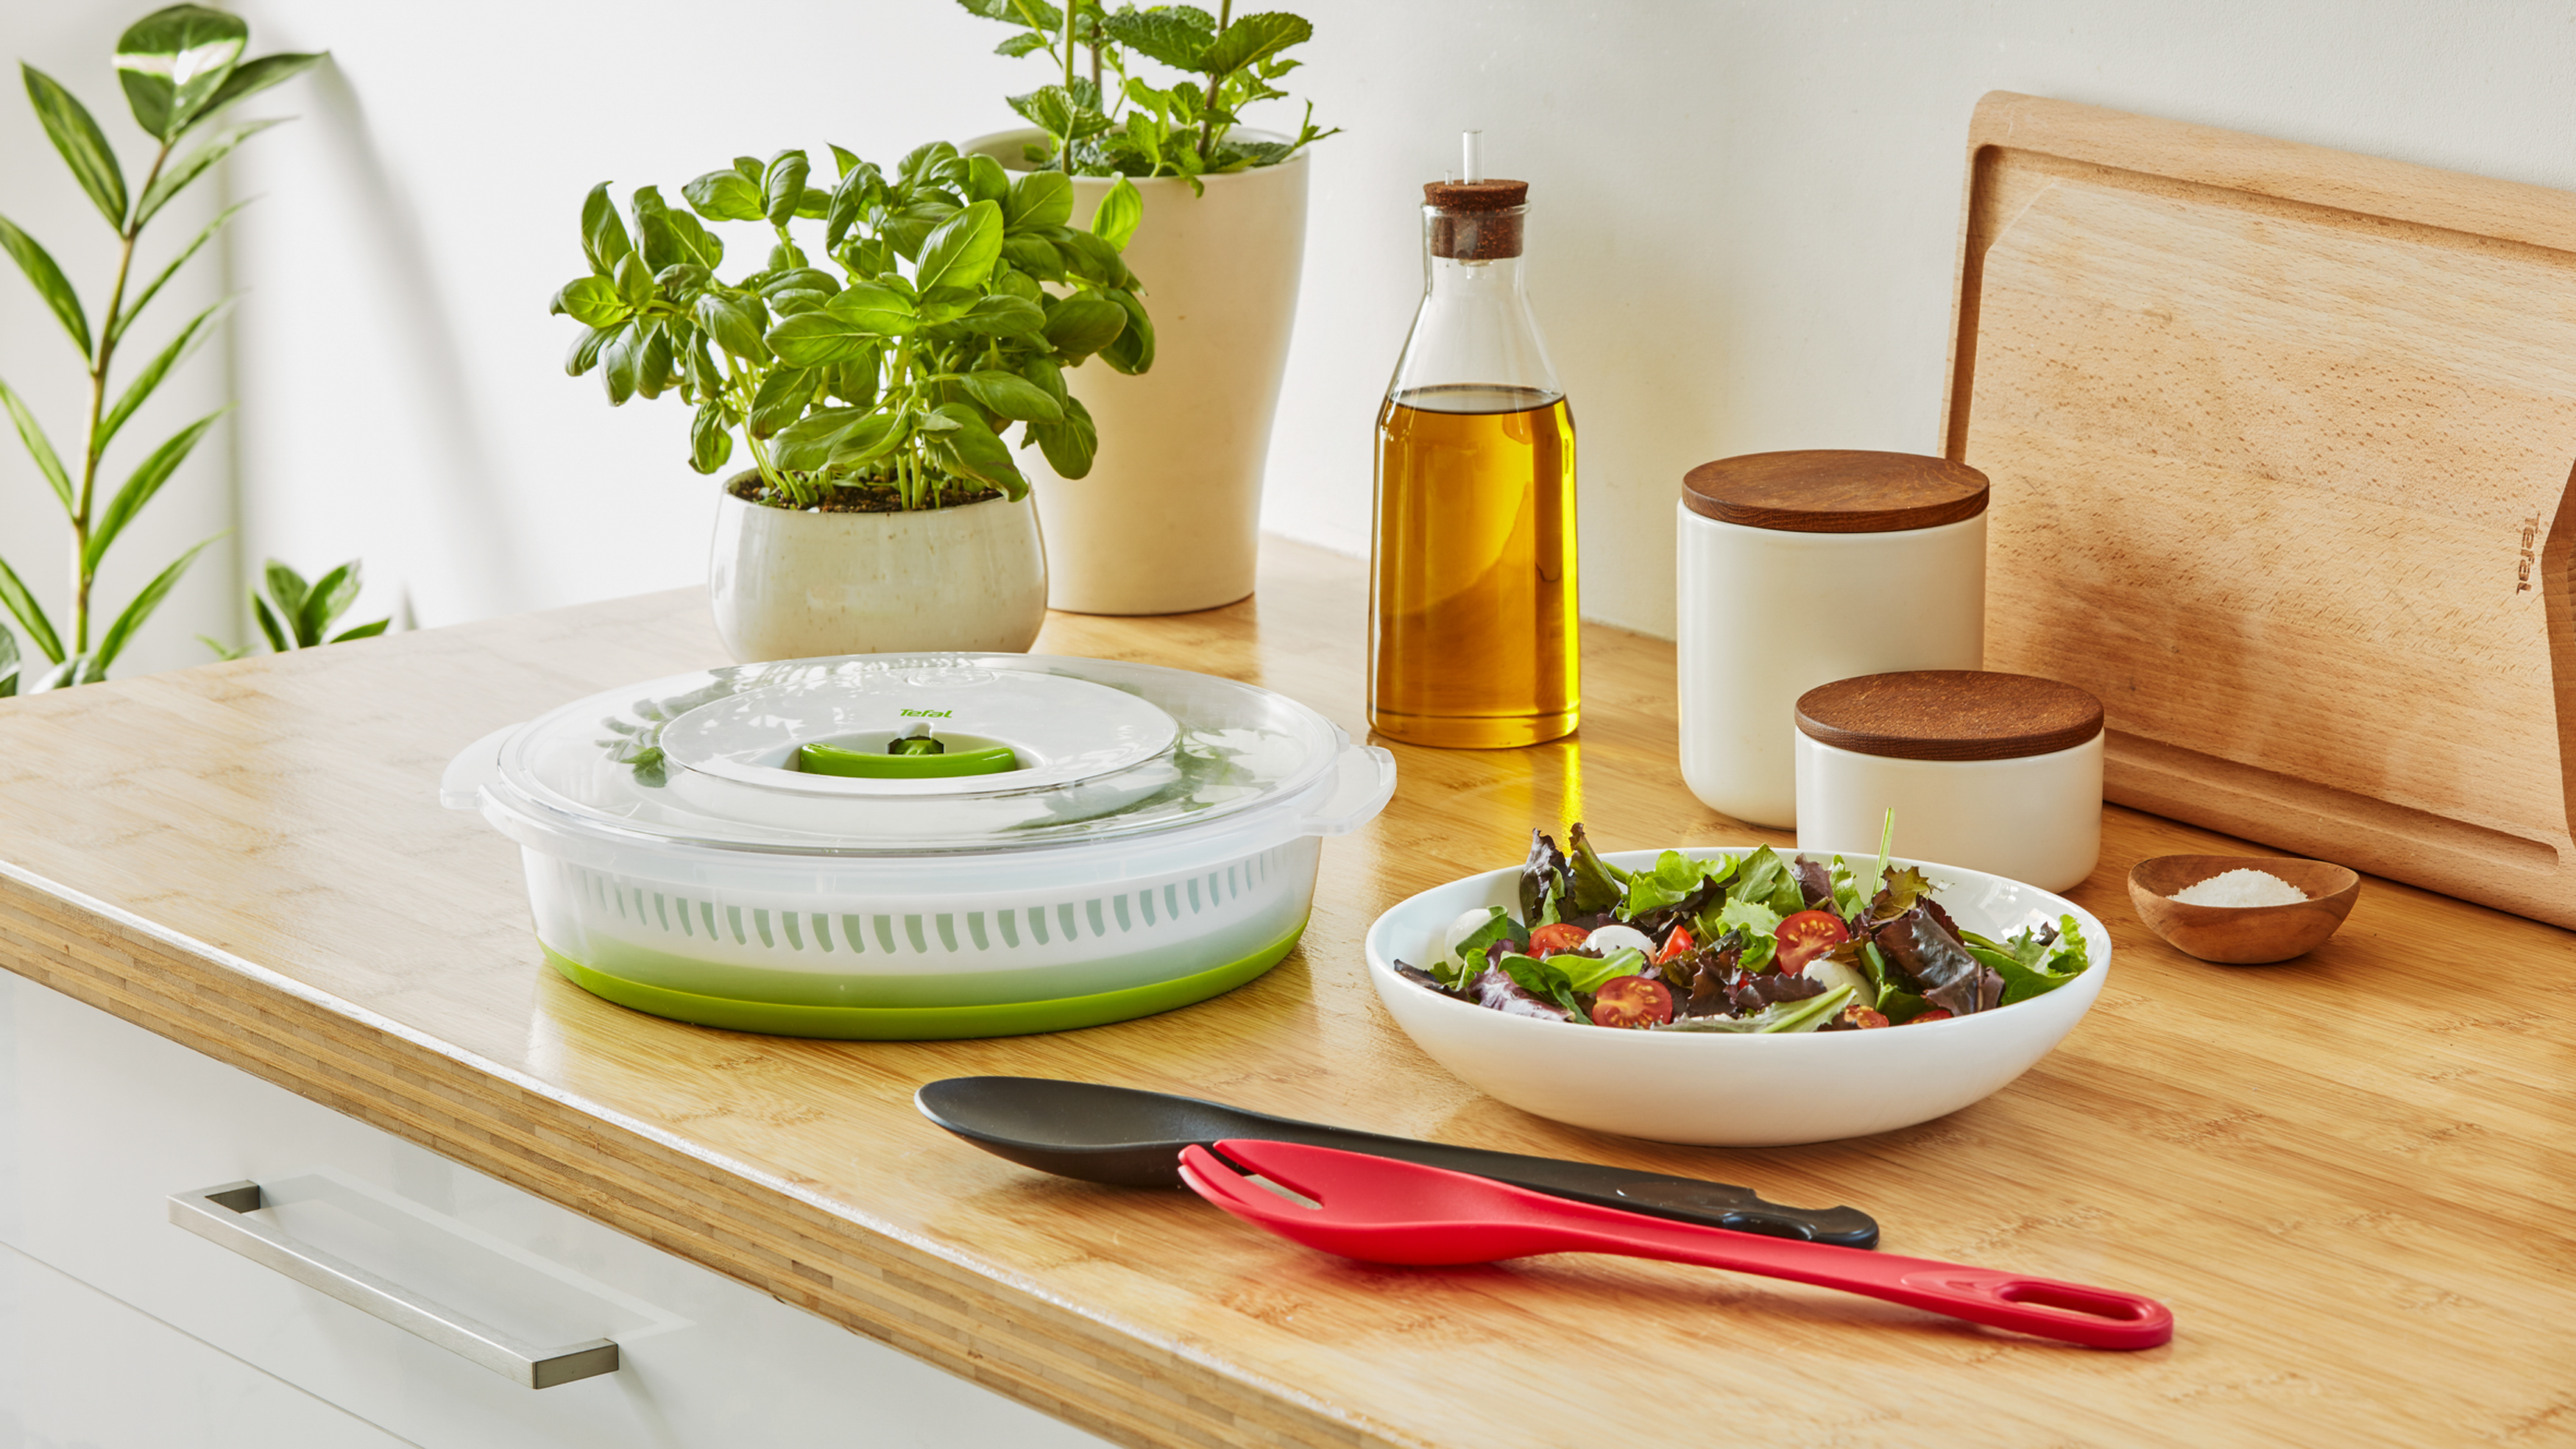 Tefal foldable salad spinner from Tefal 